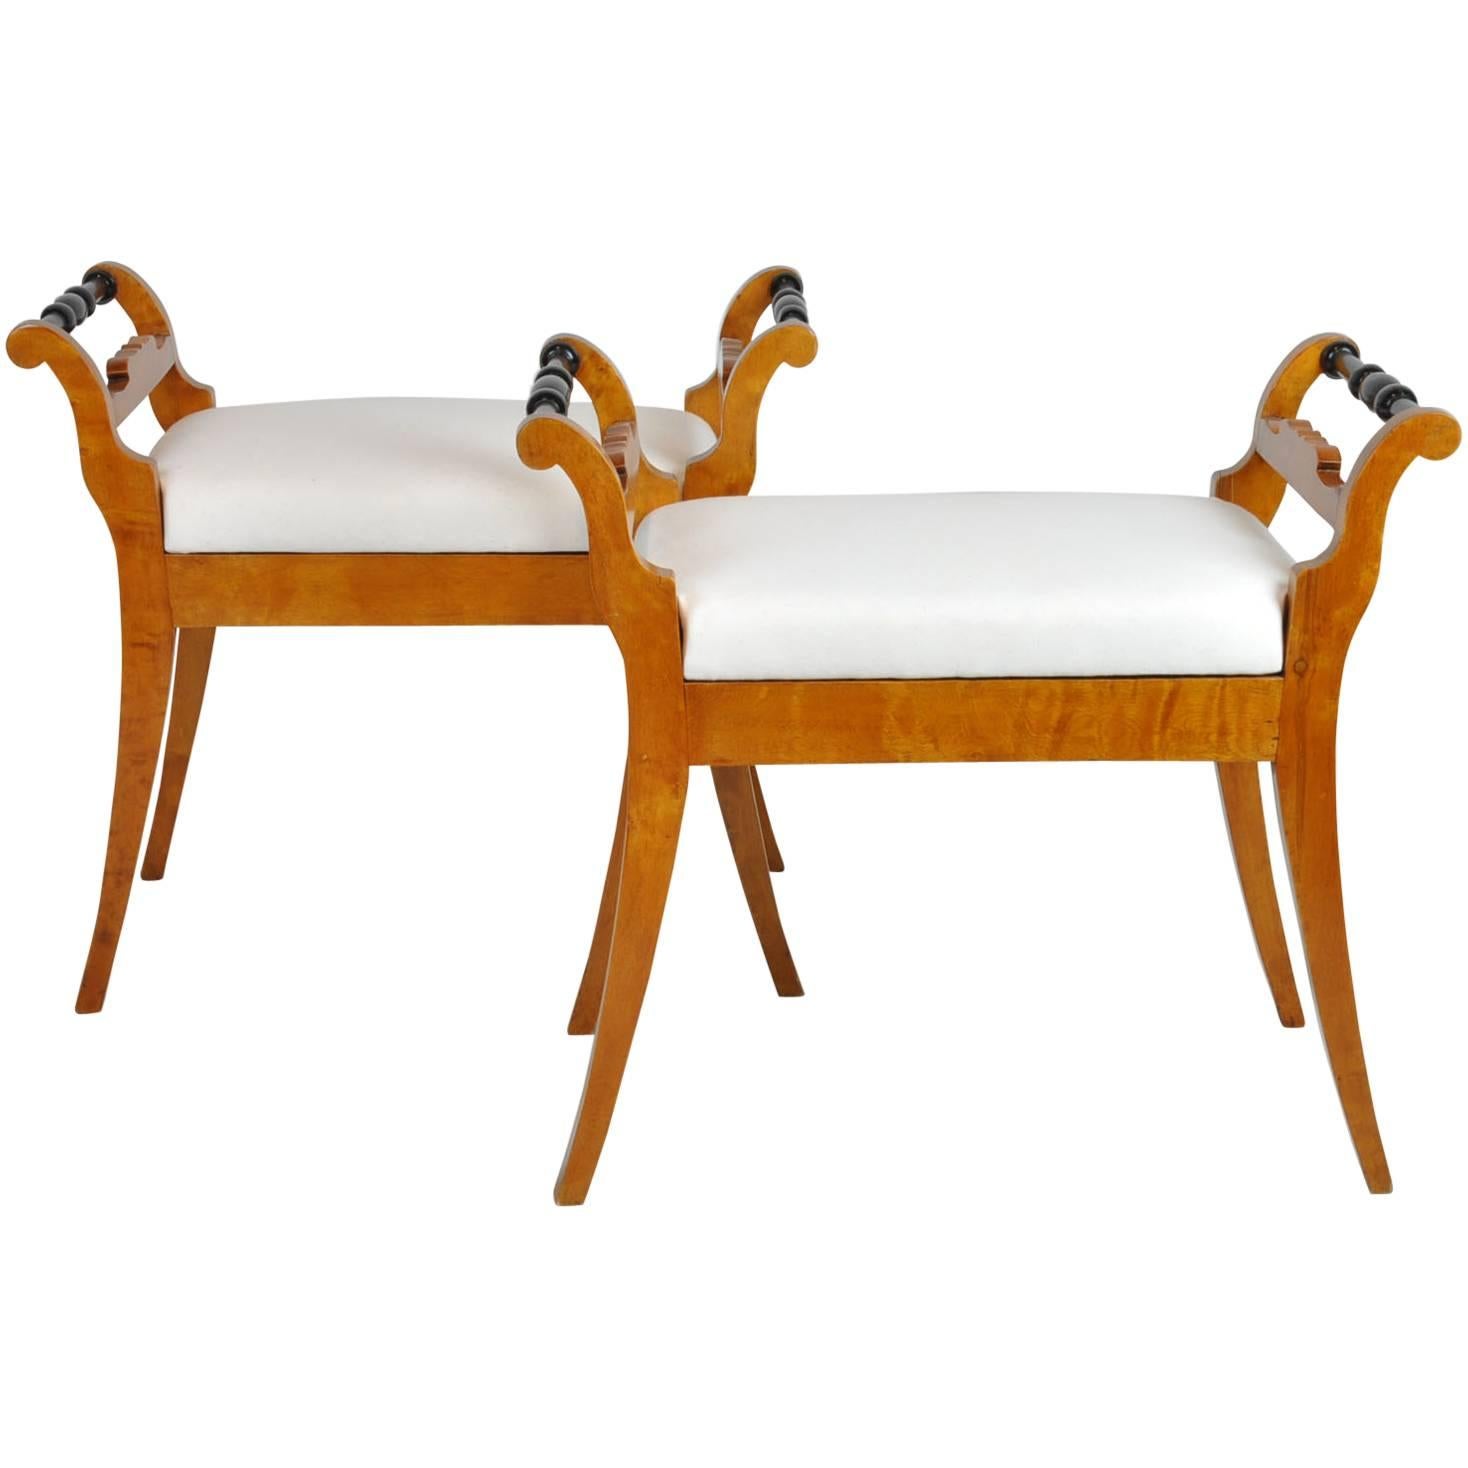 Pair of 1840s Biedermeier Benches or Stools